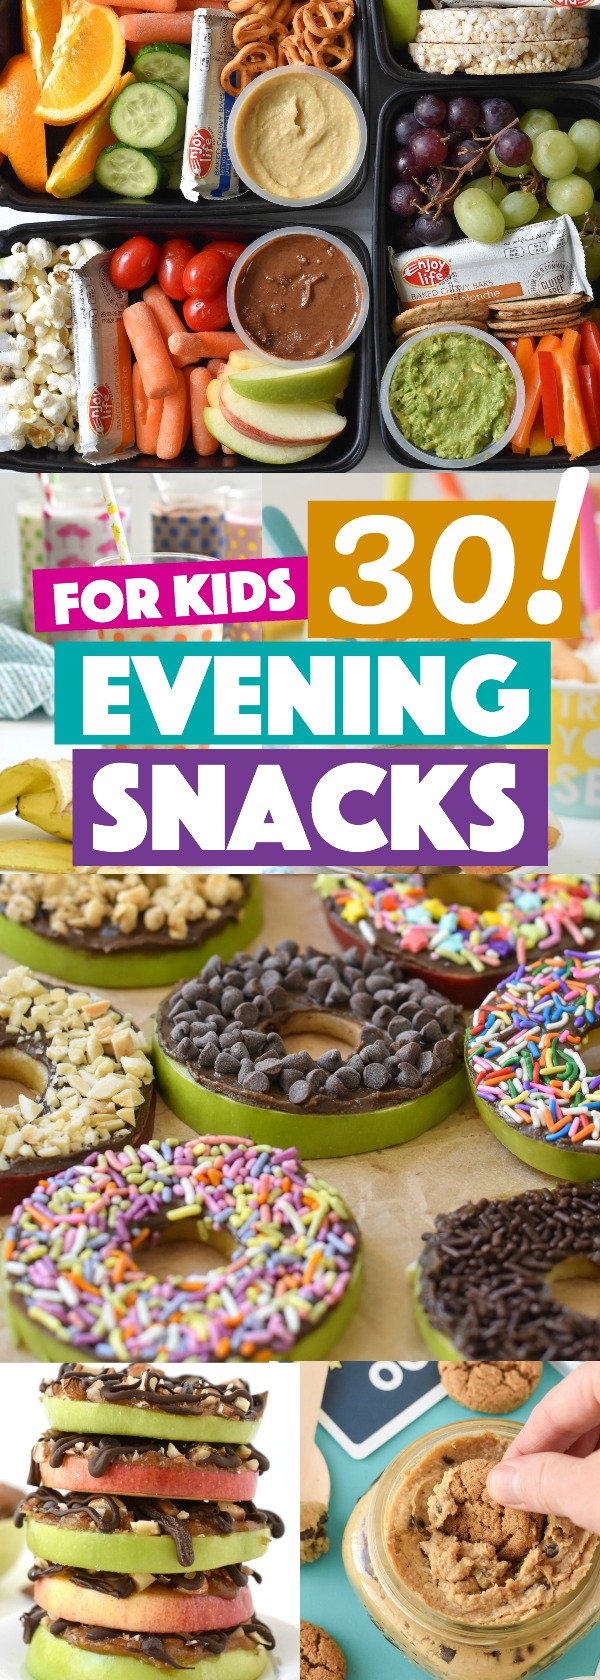 A collection of recipes for evening snacks for kids